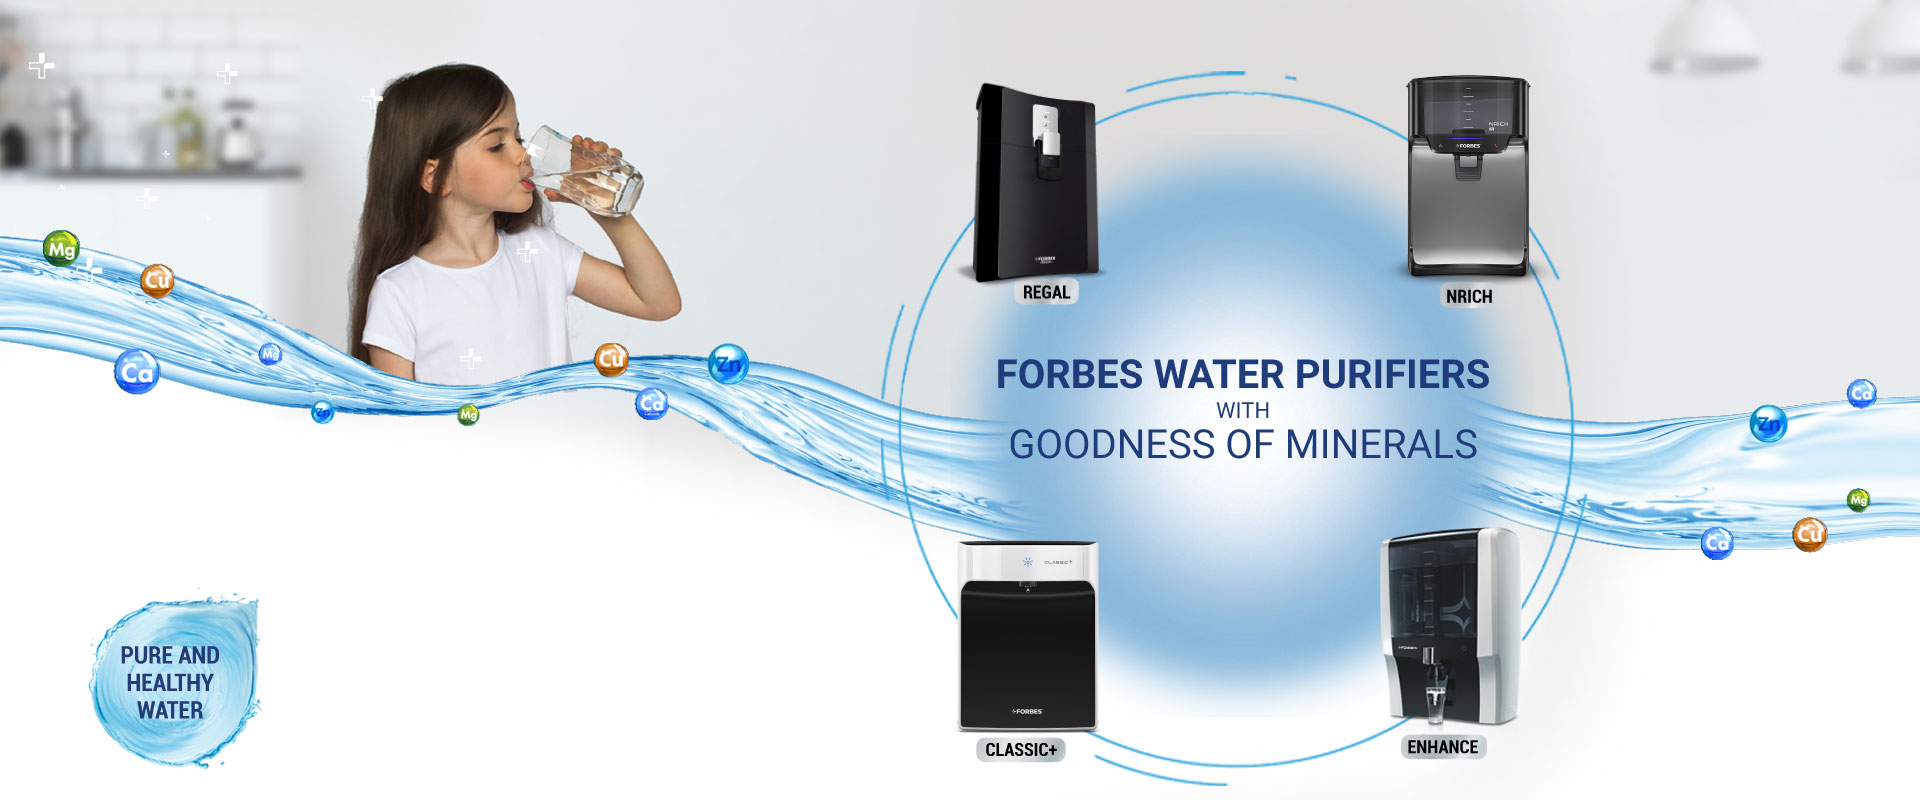 FORBES WATER PURIFIERS WITH GOODNESS OF MINERALS